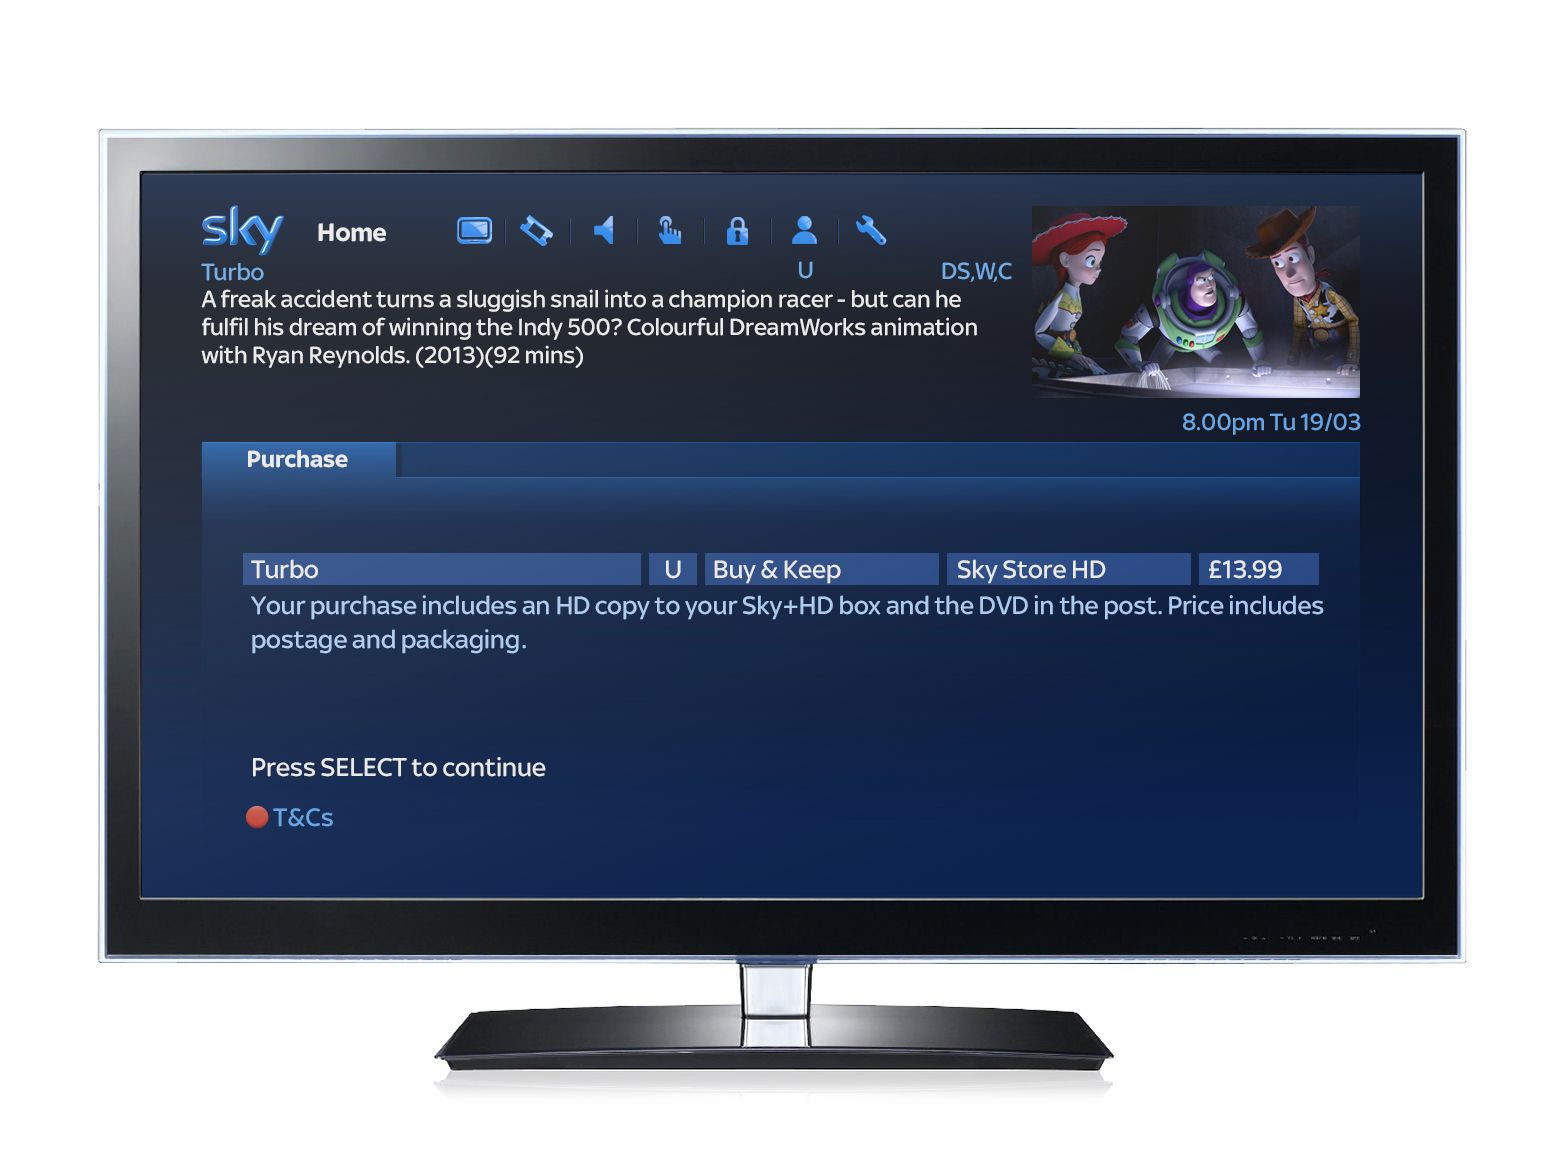 sky buy keep service lets you do just that with new movies image 7